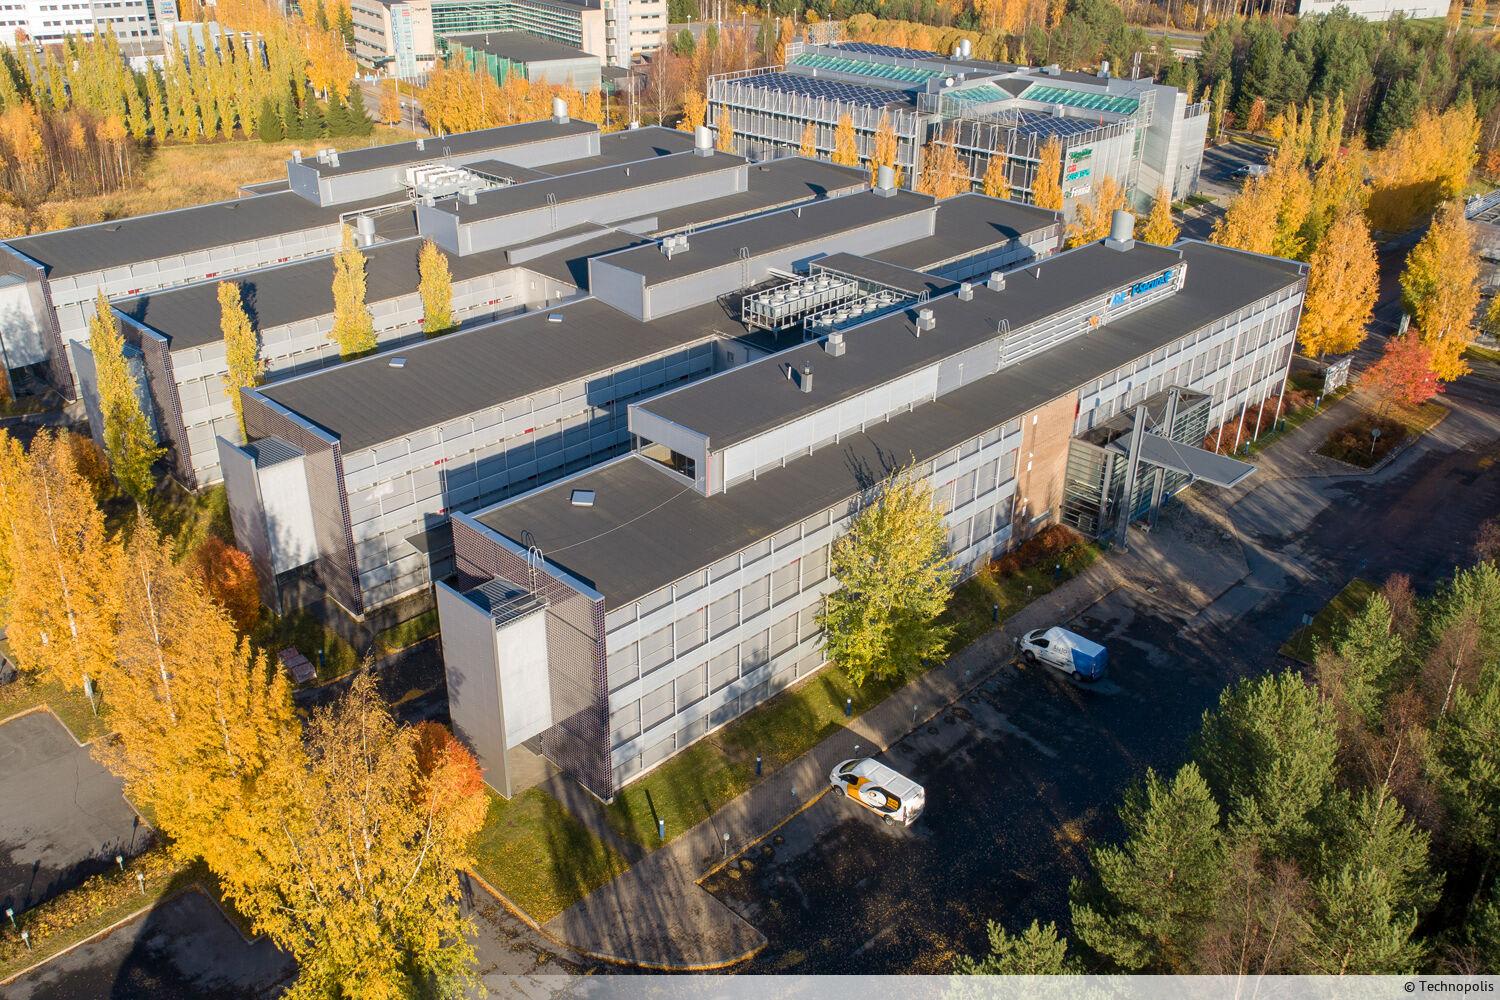 An upscale 1st floor office space for rent on Technopolis Linnanmaa campus. This space consists of several office rooms of different sizes.Technopolis Linnanmaa offers a wide range of excellent services to its tenants.